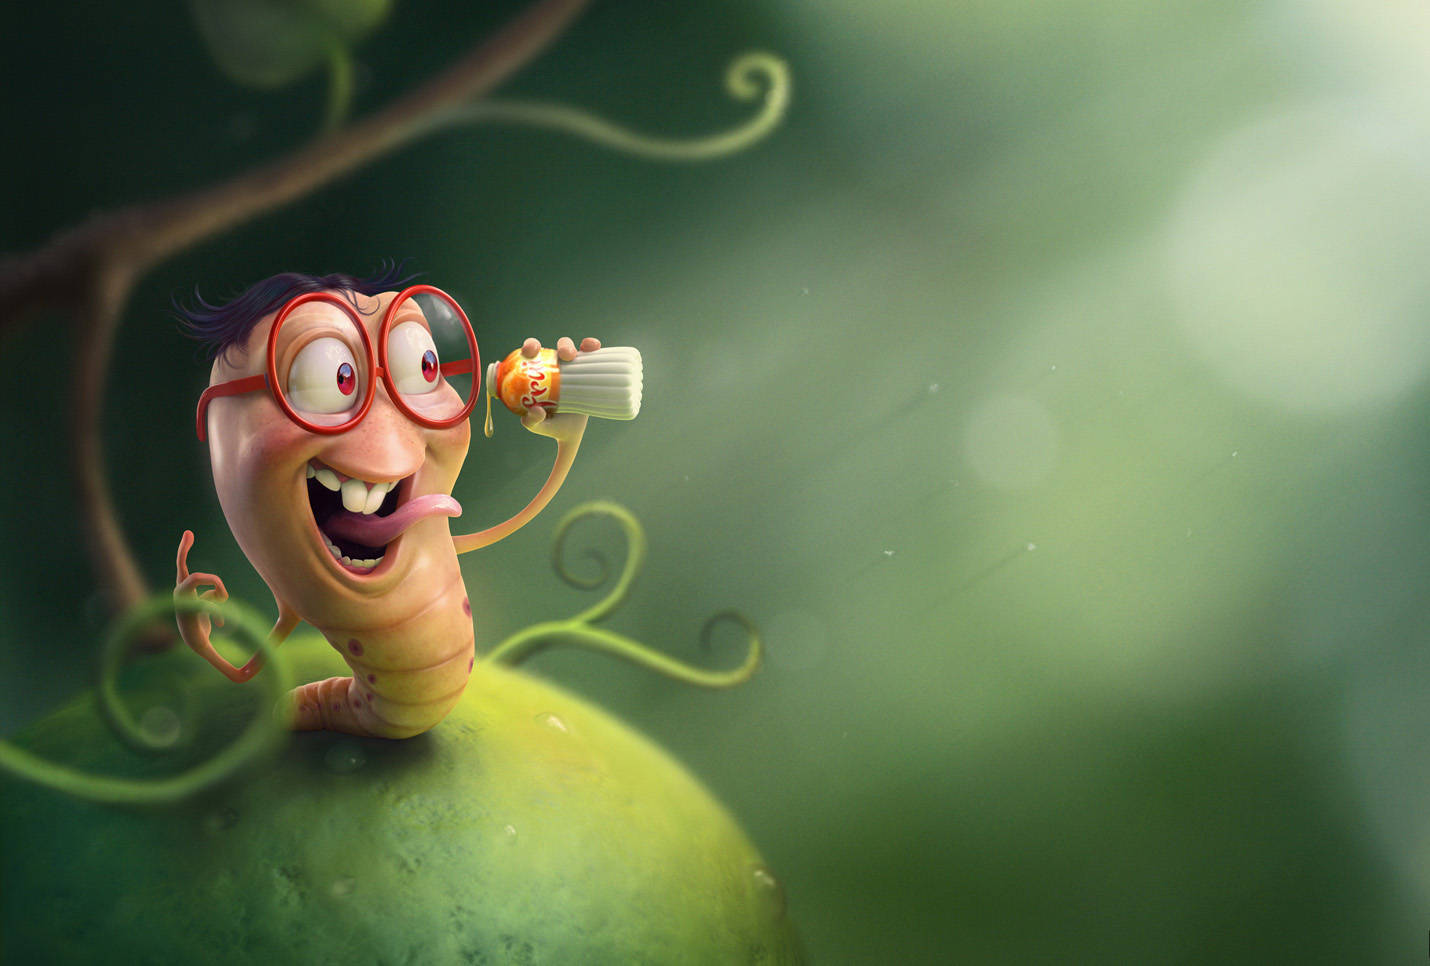 Funny-looking Worm With Glasses Wallpaper